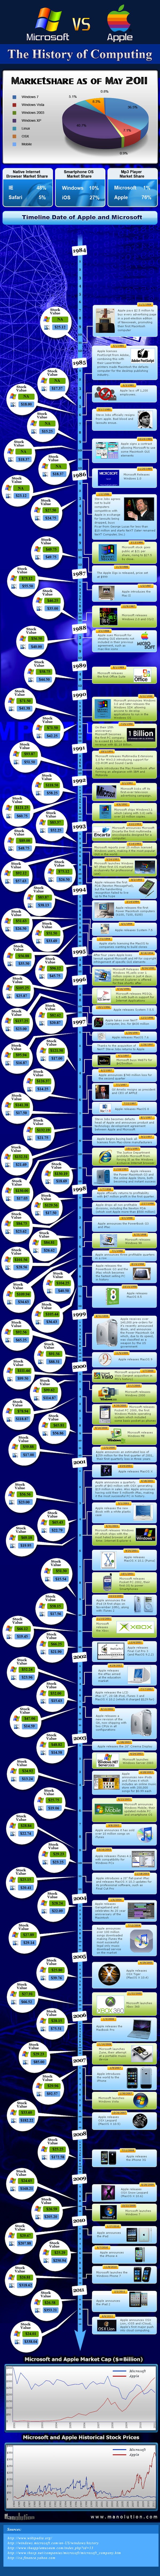 The History of Computing [Infographic]